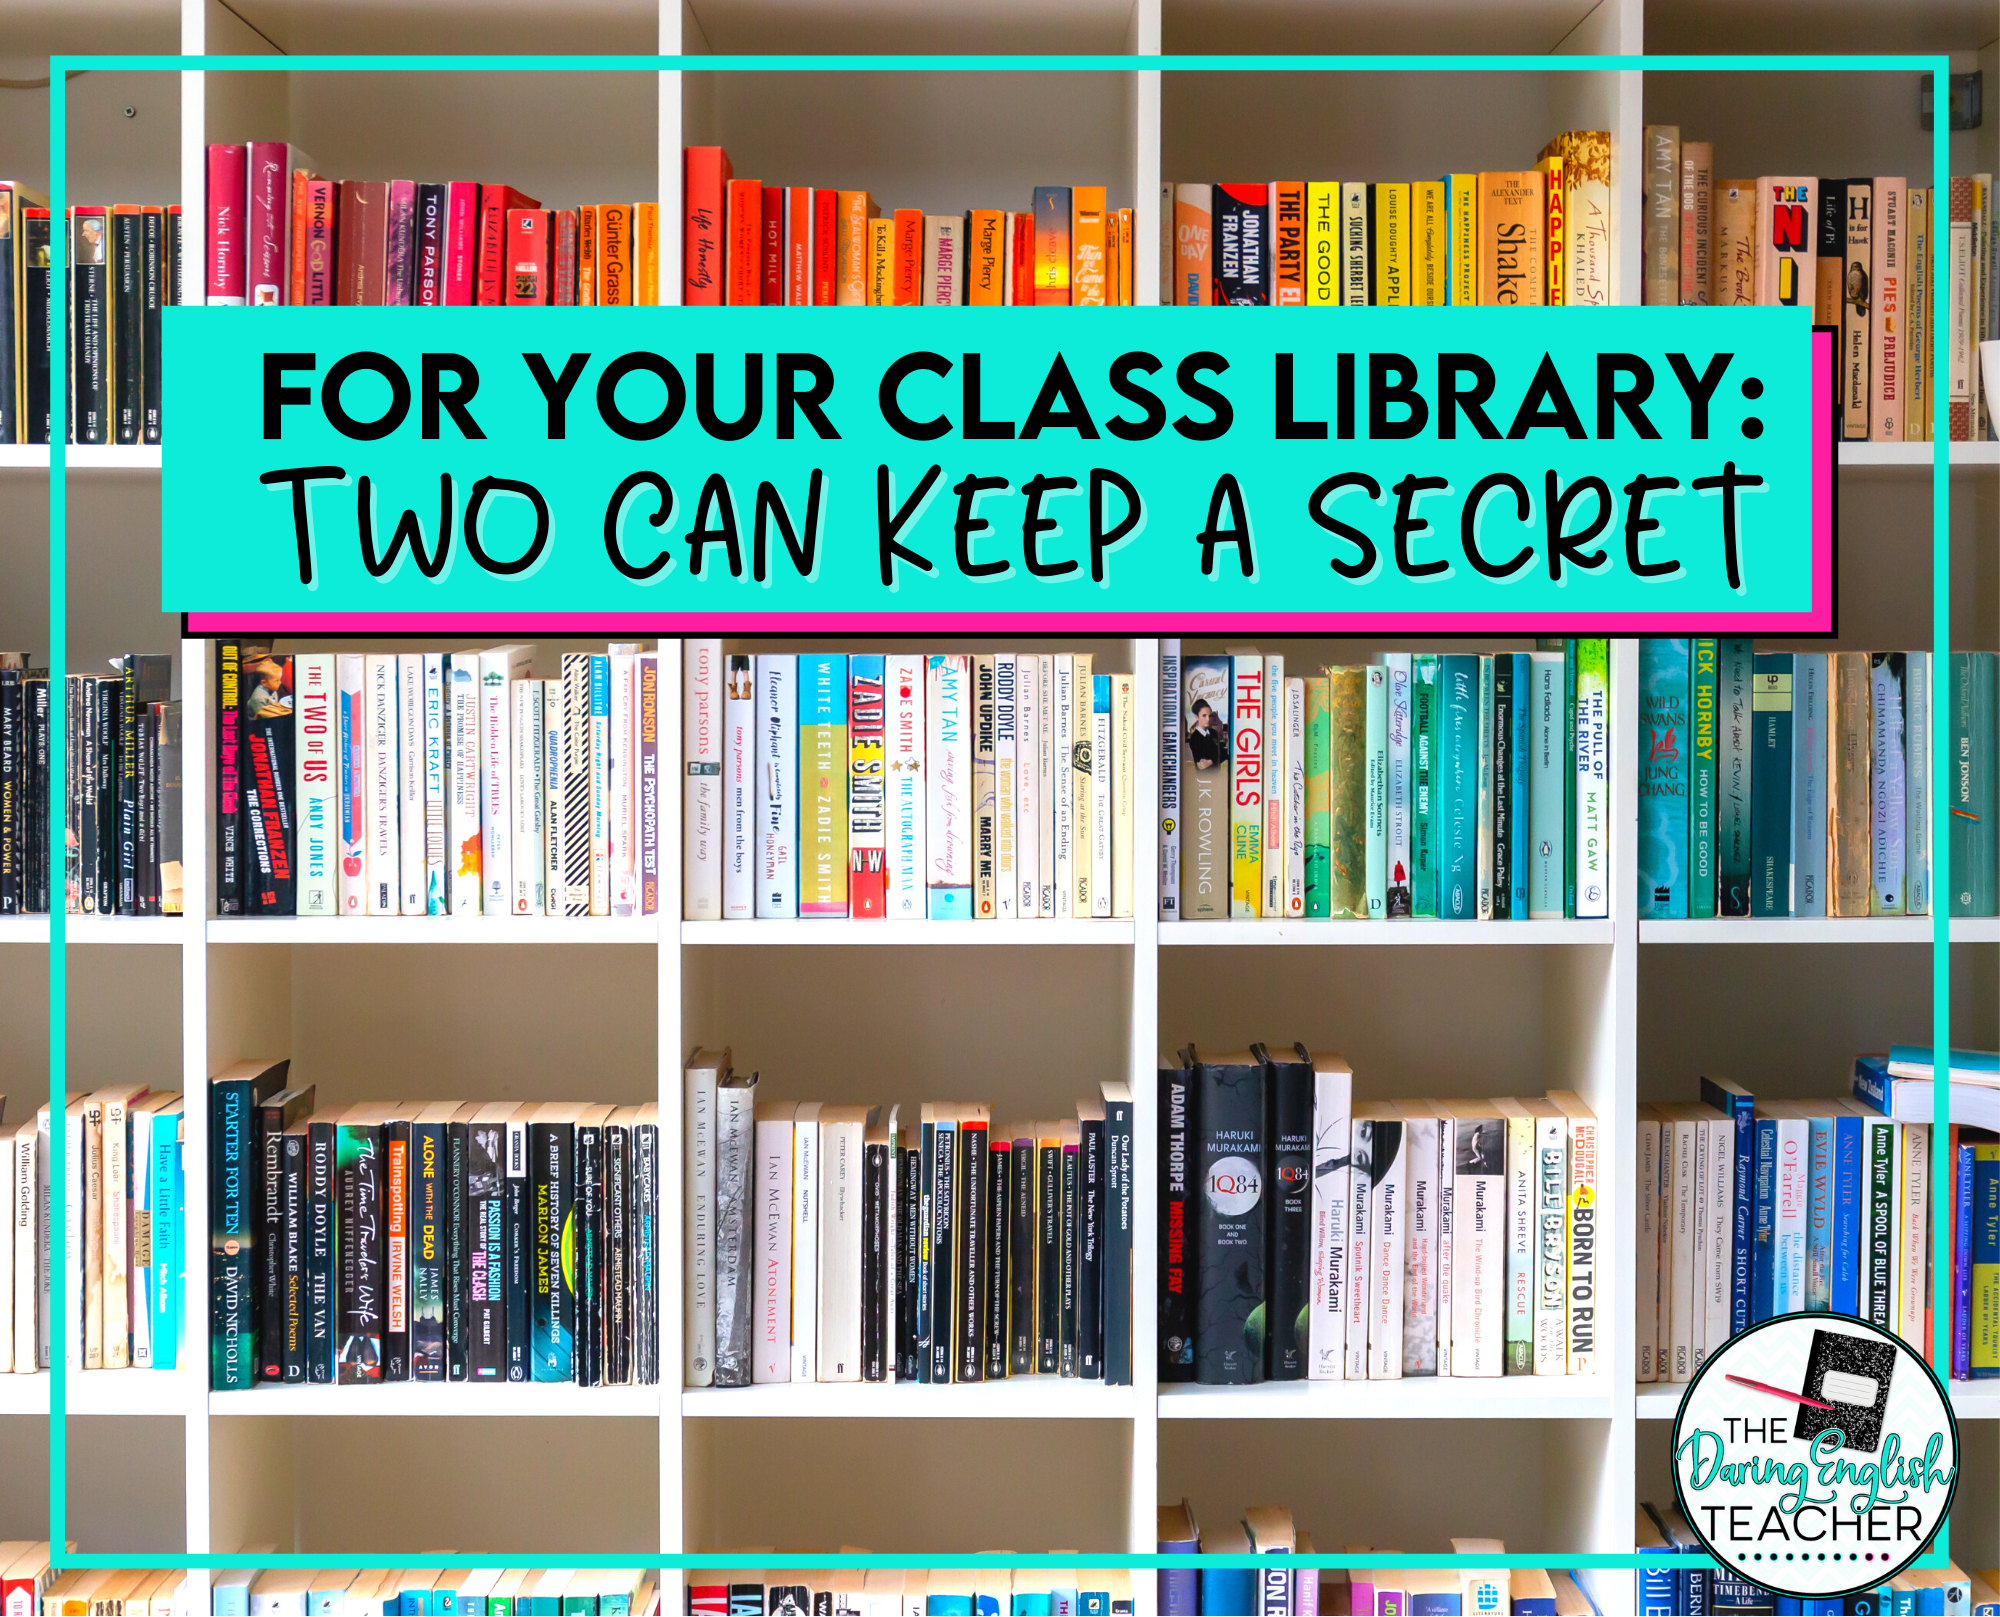 For your classroom library: Two Can Keep a Secret